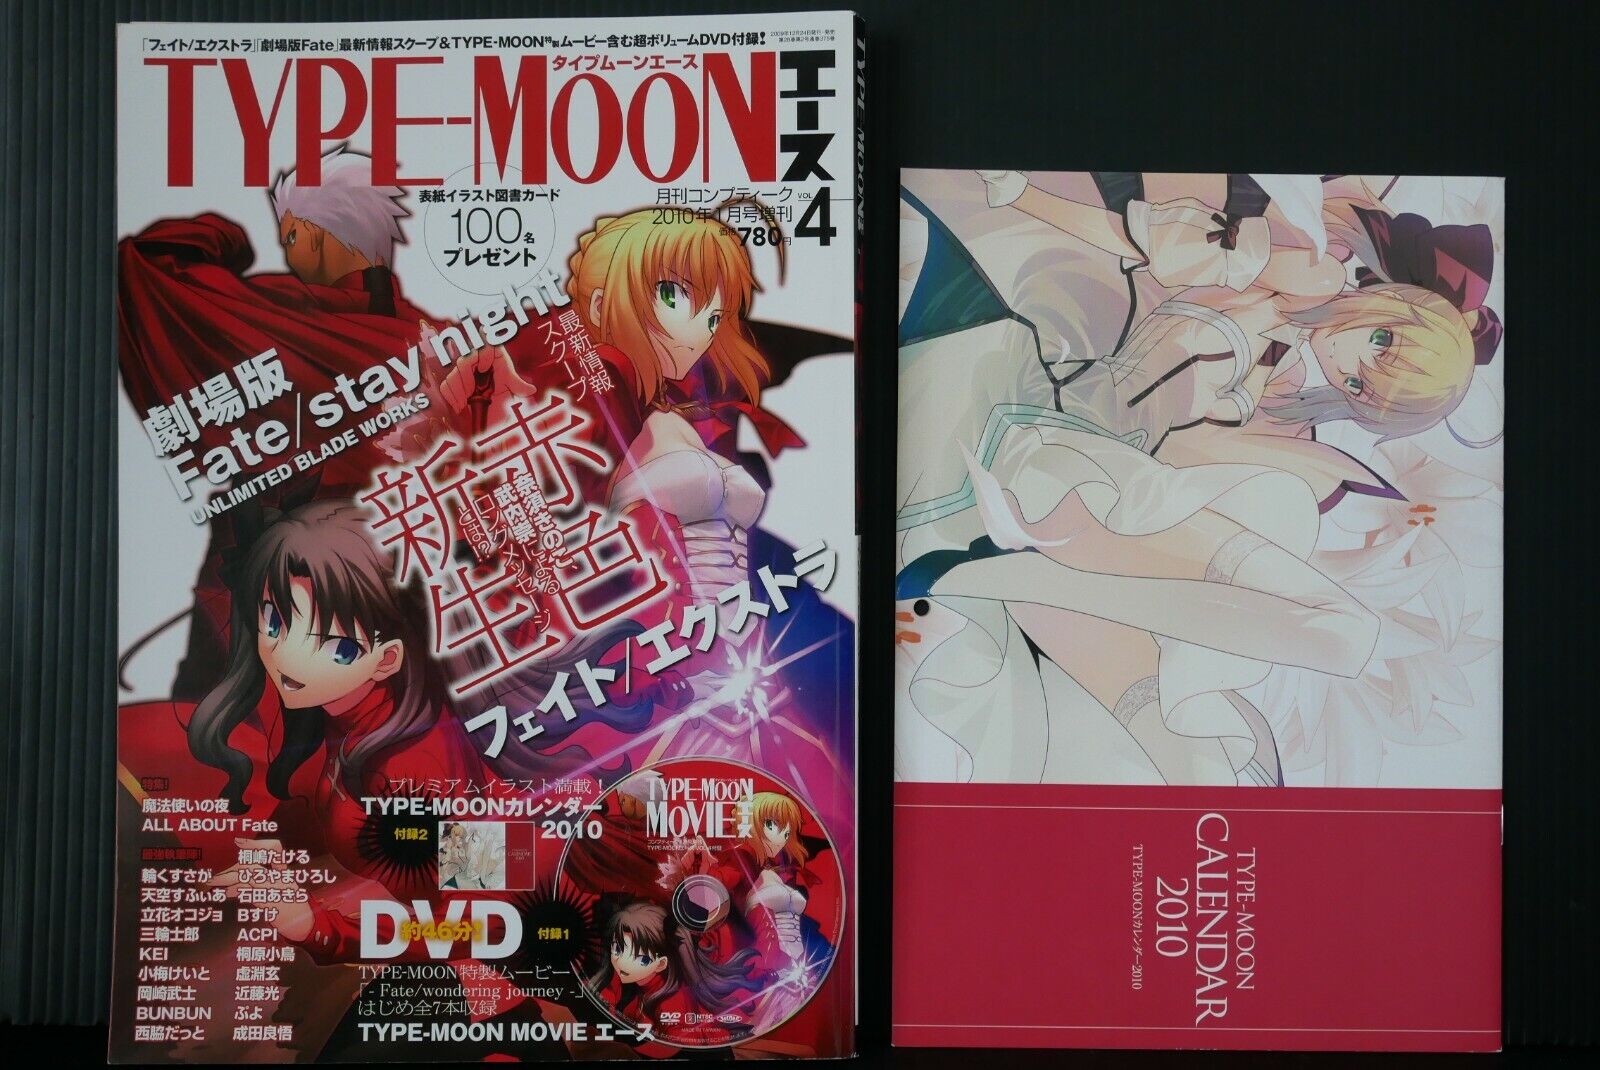 JAPAN Magazine: Type-Moon Ace Vol.4 (Fate/stay night Unlimited Blade Works etc.)